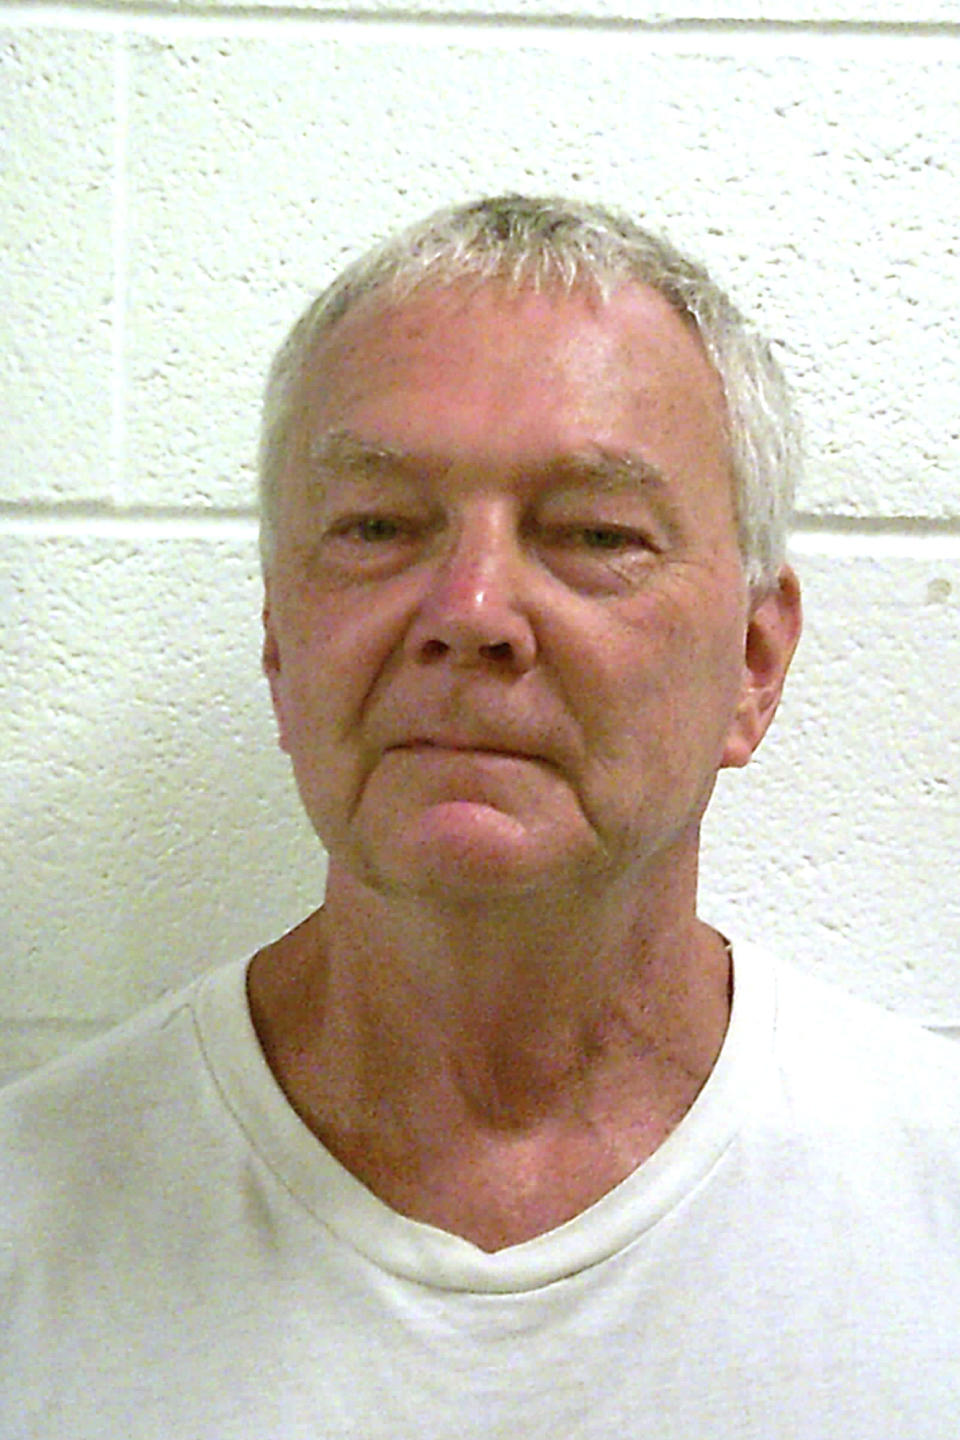 This 2023 photo provided by the Mississippi Department of Corrections shows Howard M. Neal. The Mississippi Supreme Court ruled unanimously Thursday, Aug. 24, 2023, that former death row inmate Howard M. Neal, will be resentenced a second time because of a determination that he has intellectual disabilities. The new sentence will make Neal eligible for the possibility of parole. (The Mississippi Department of Corrections viia AP)